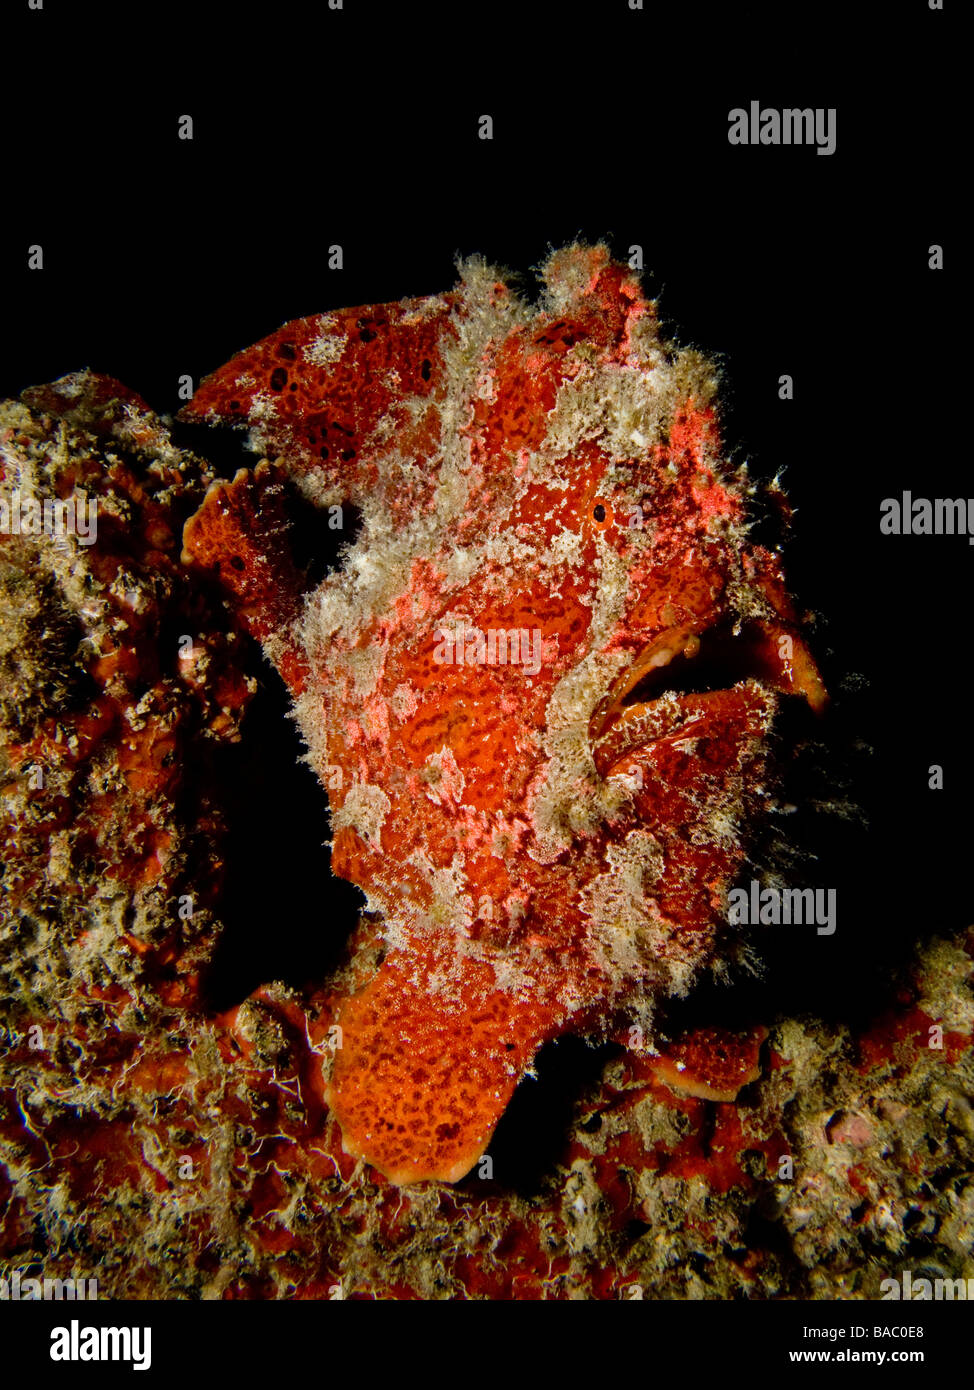 Red Giant frogfish on black background. Stock Photo